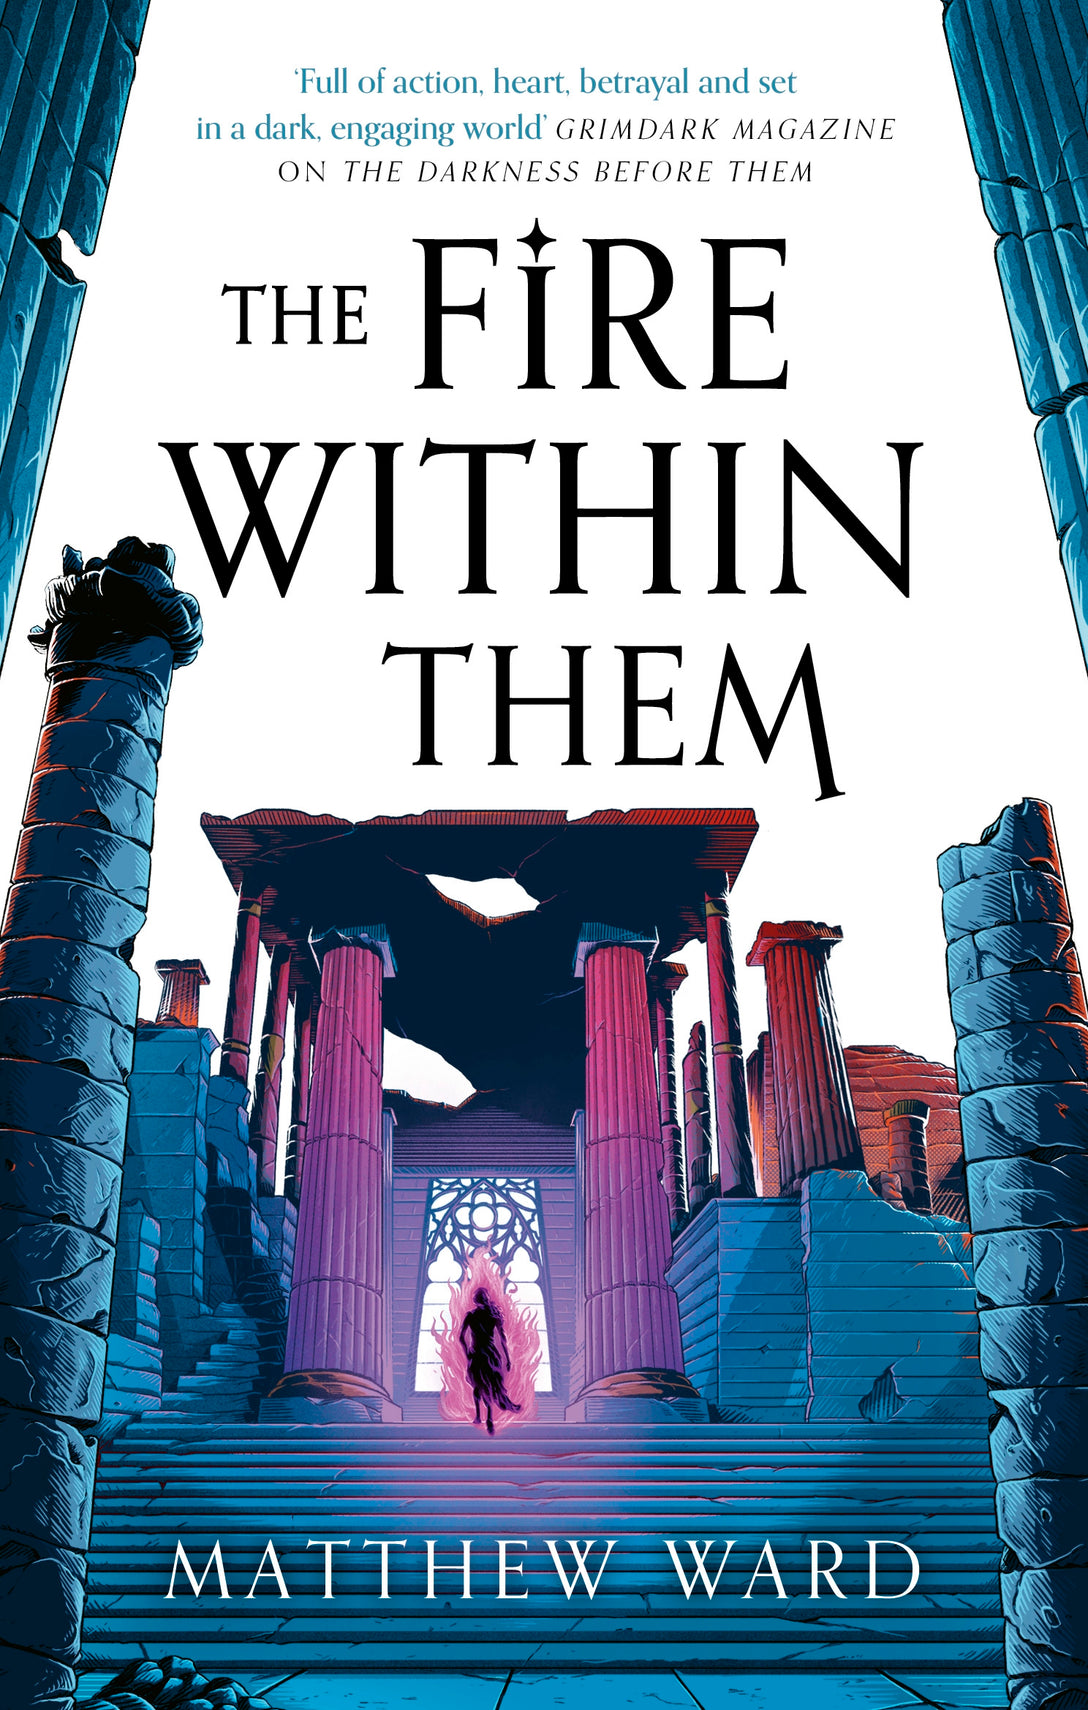 The Fire Within Them by Matthew Ward